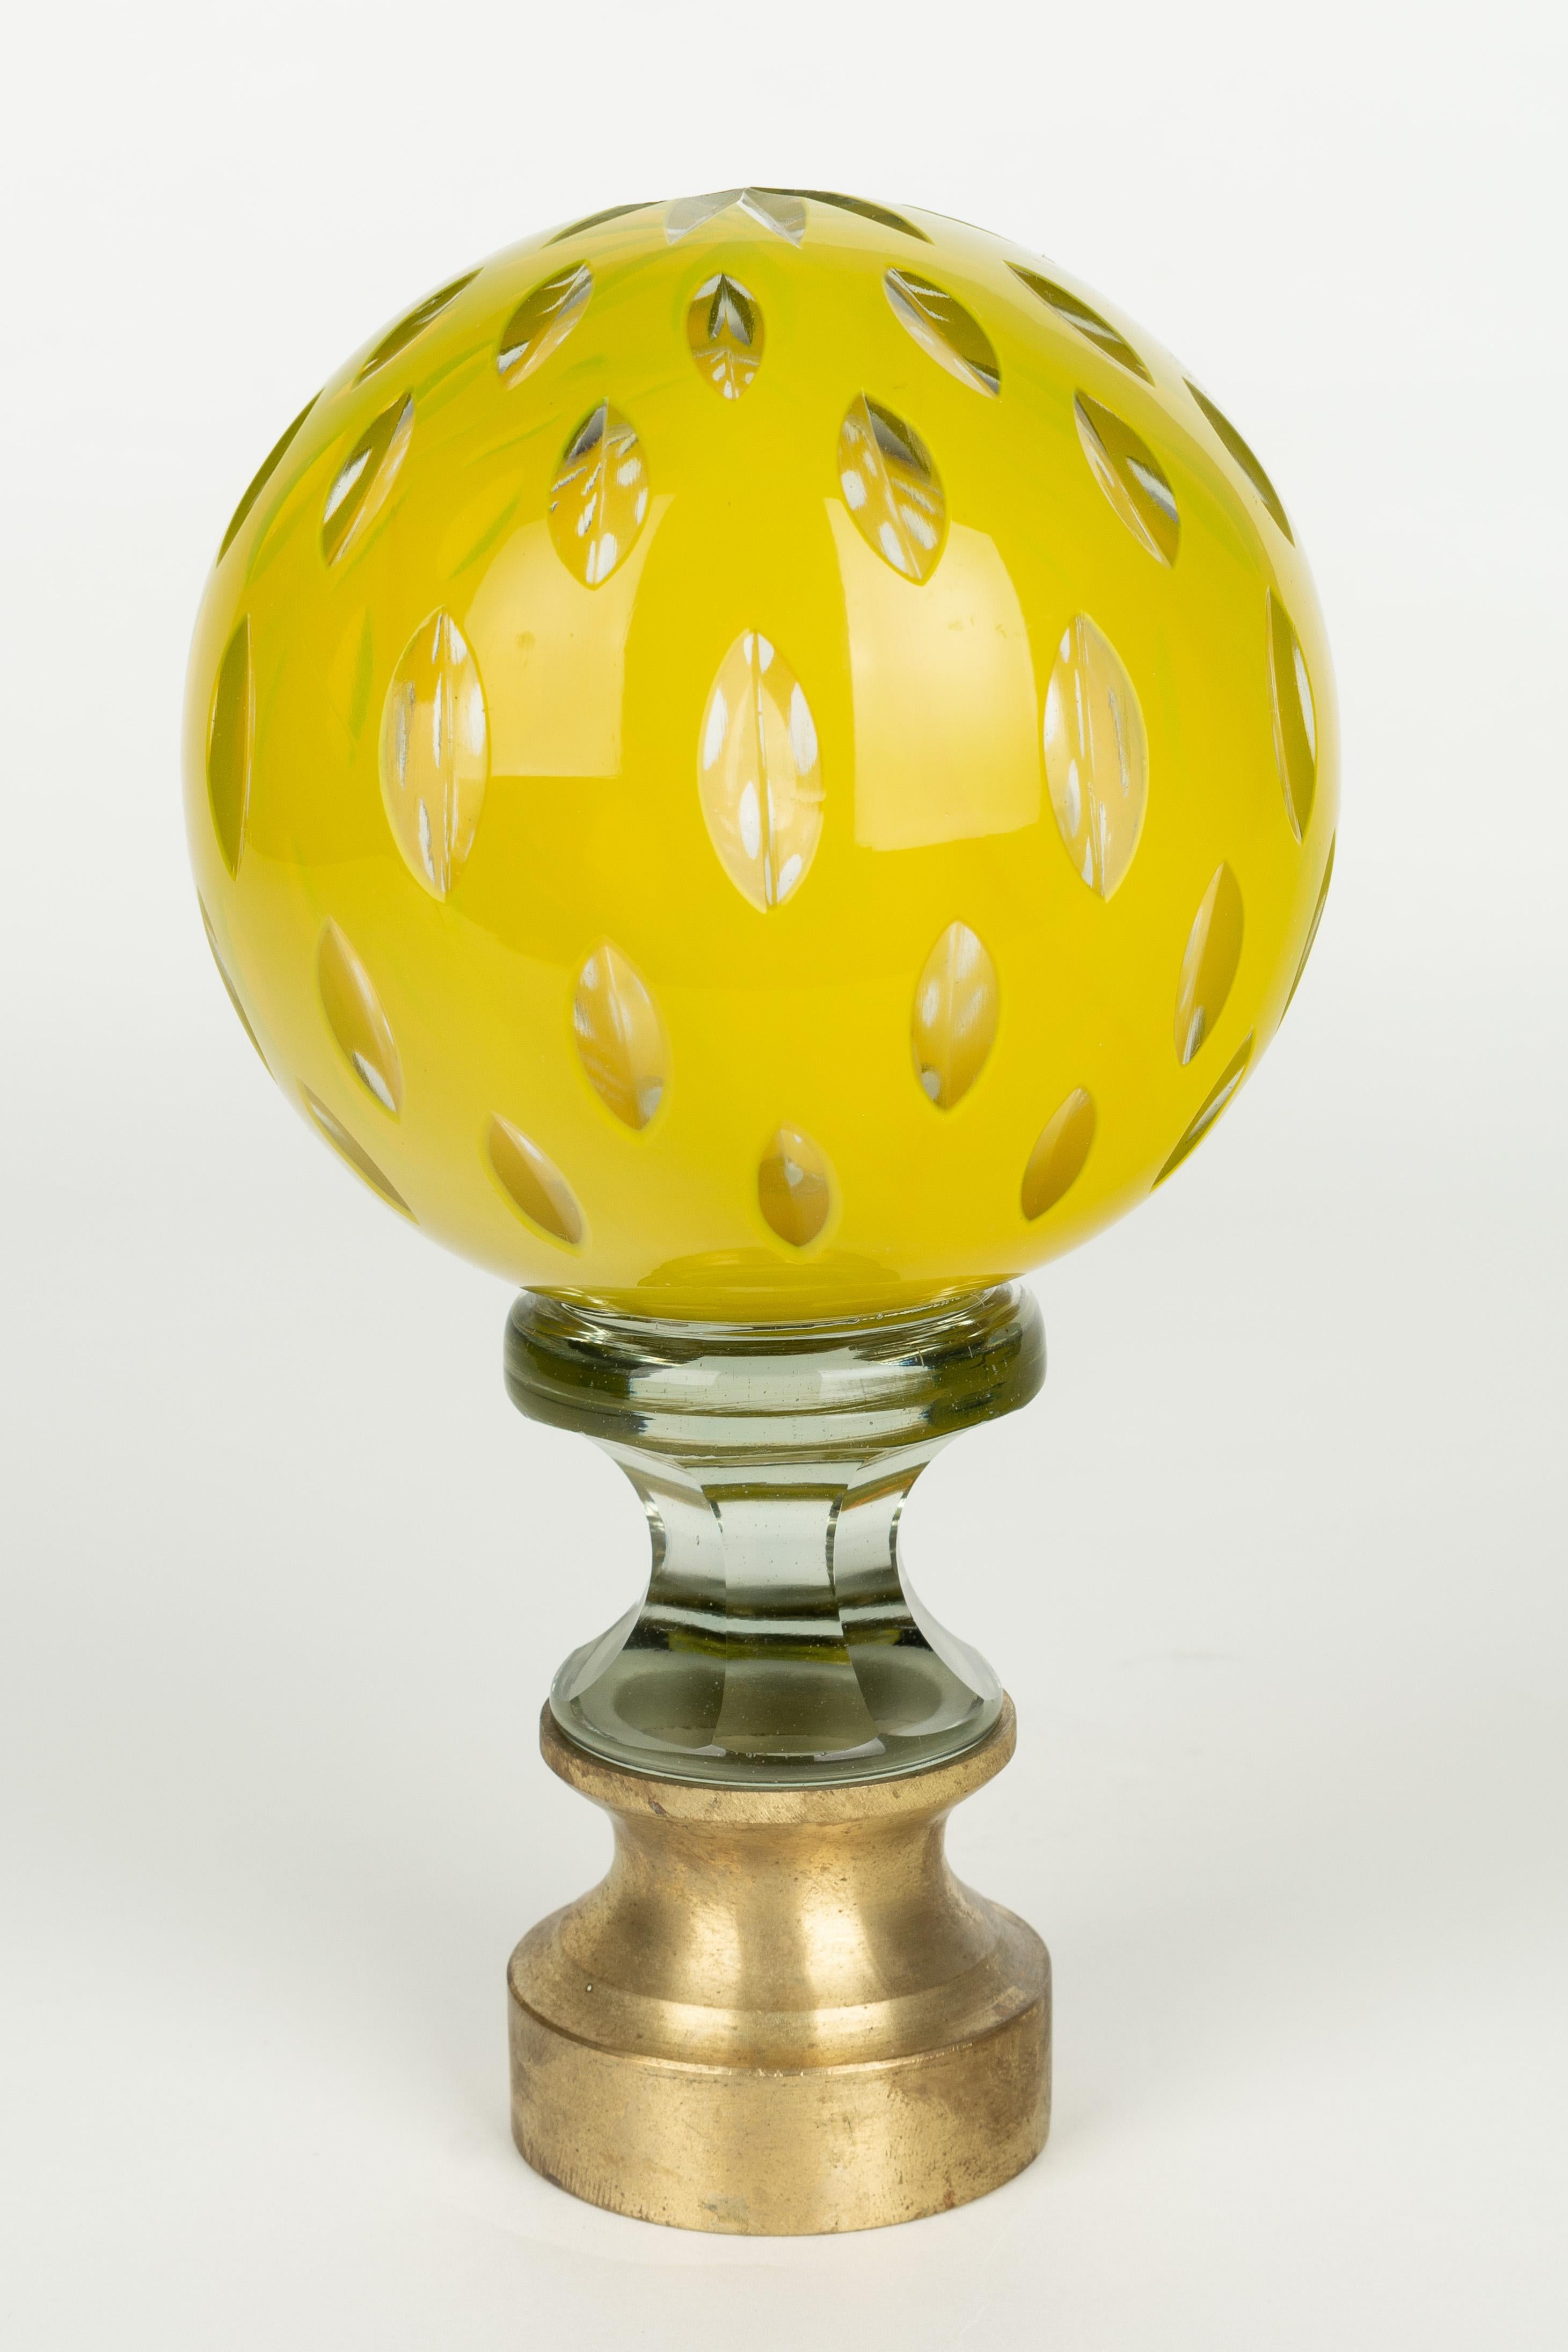 A French crystal newel post finial or boule d'escalier. Made of two layers of cased glass with the yellow glass surface cut to reveal clear glass underneath. Brass hardware base. These wonderful finials were used as decorative elements at the bottom